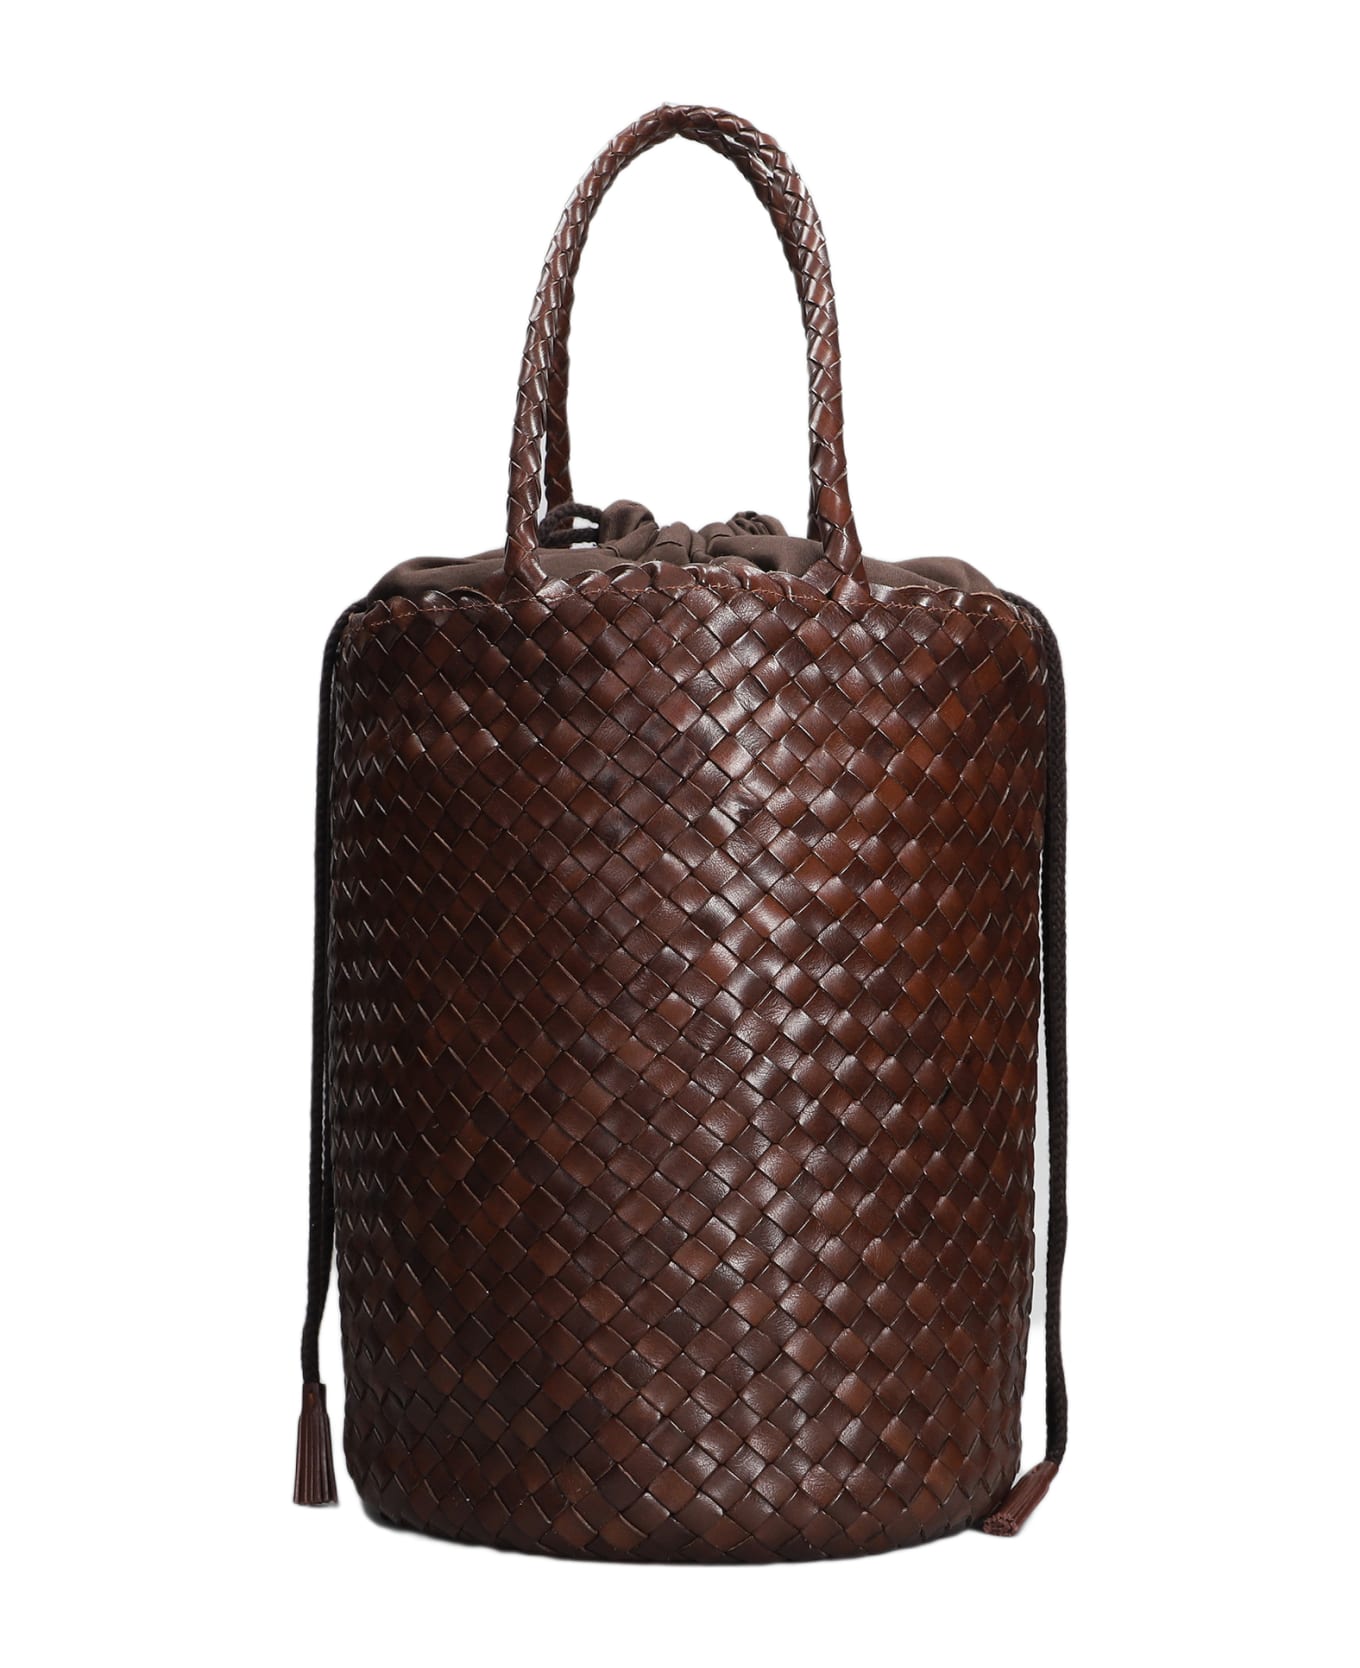 Dragon Diffusion Jacky Bucket Hand Bag In Brown Leather - brown